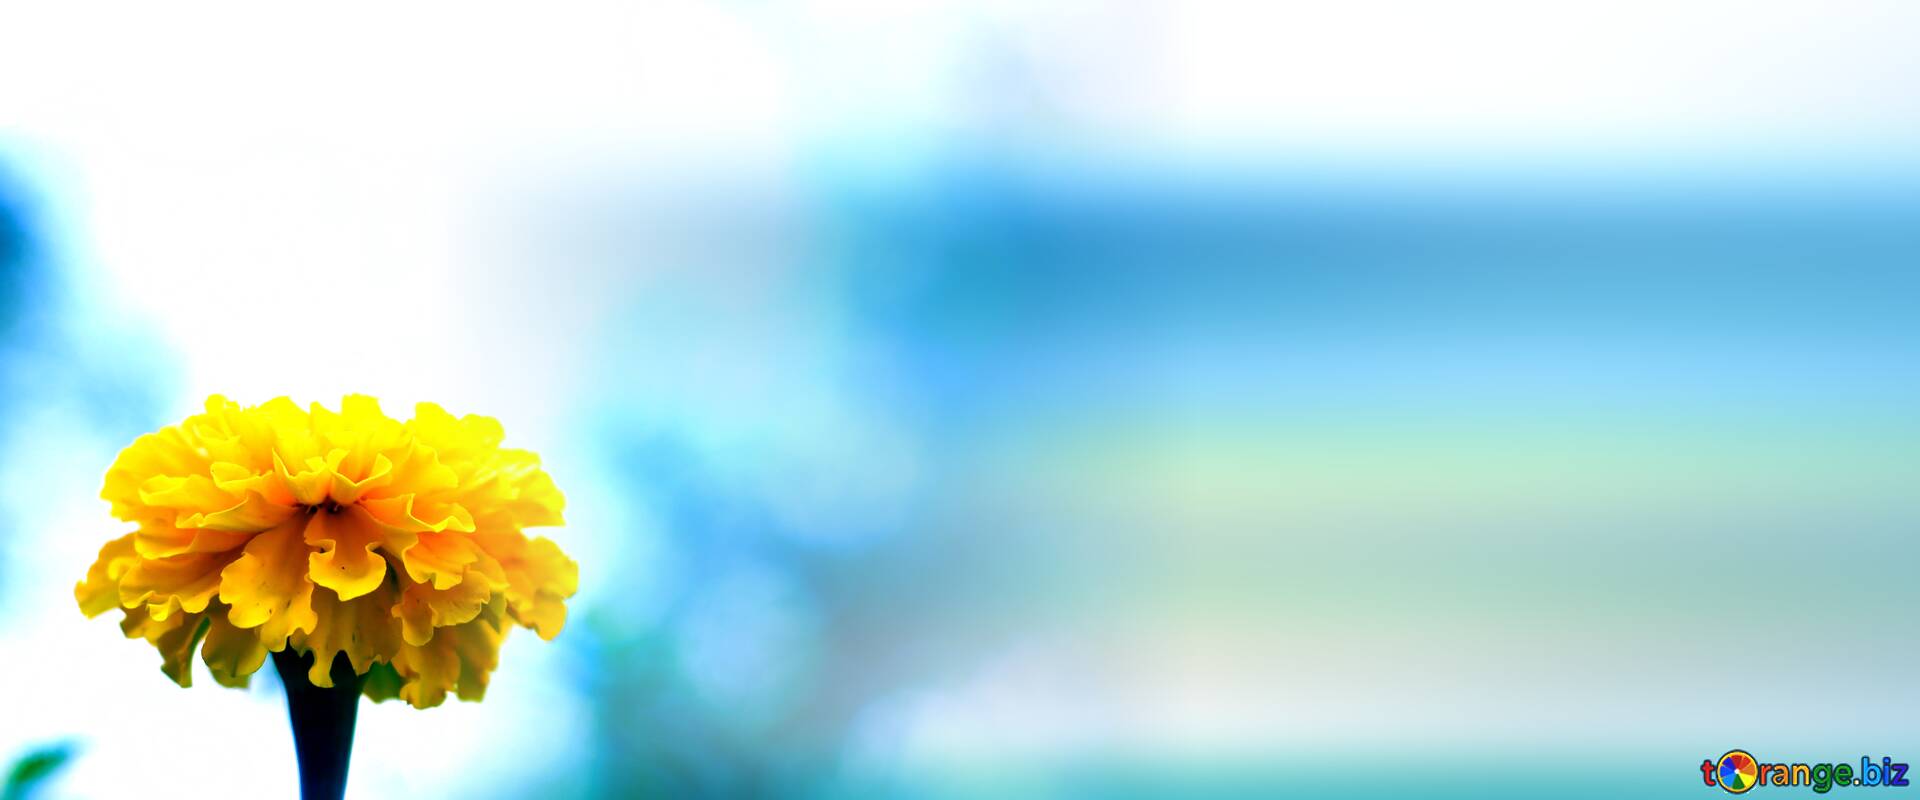 Blue flower background on CC-BY License ~ Free Image Stock  ~ fx  №231399